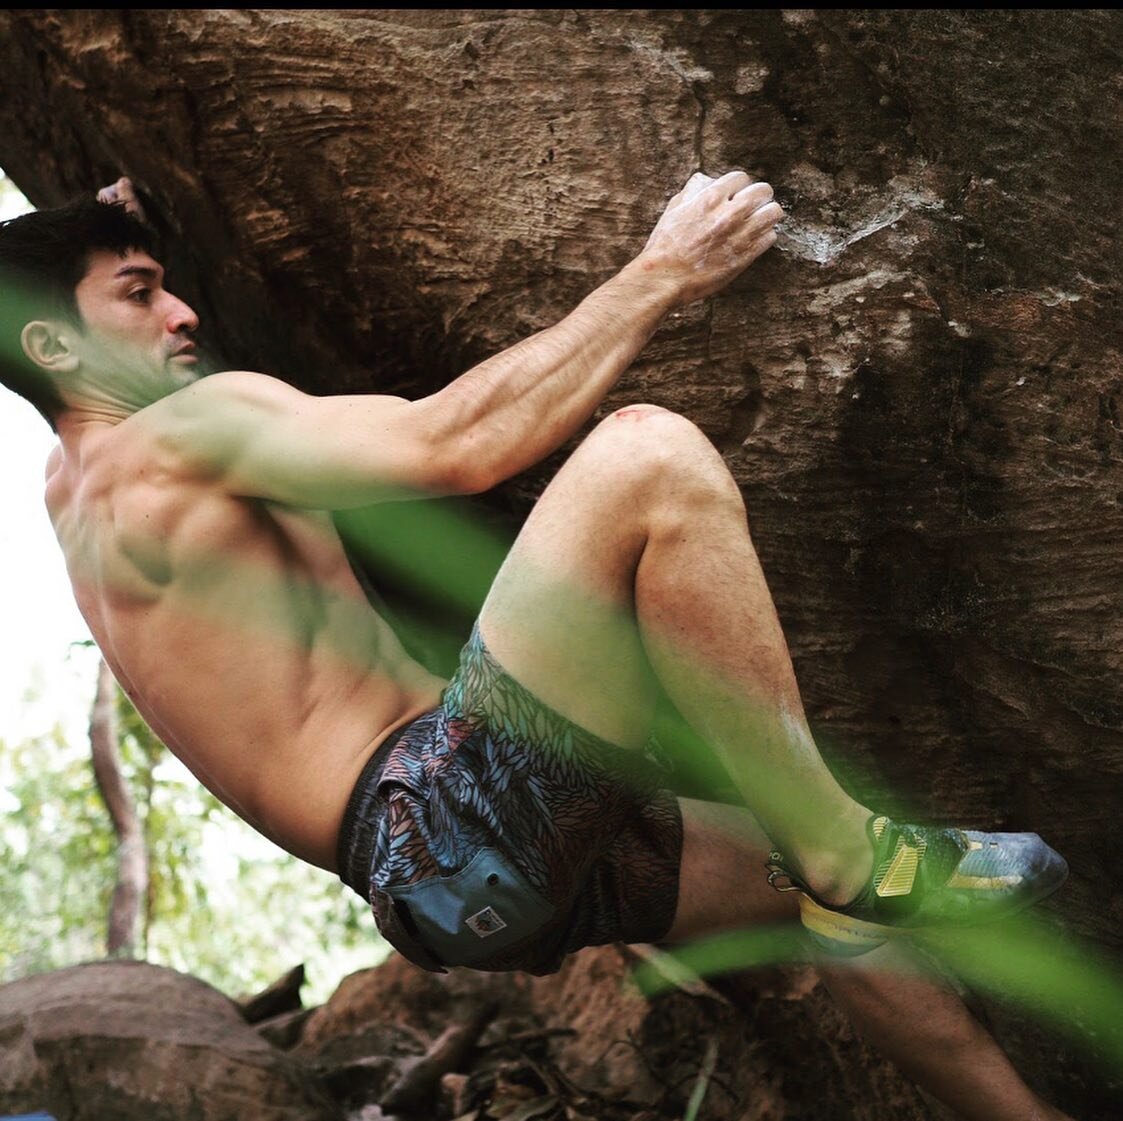 Davide Boncimino is a climber! He climbs with other bartenders too!  Read the story on sharlafied.com at 3 CET 🕐
Follow sharlafied !🔥
.
.
.

#climbing #bouldering #mountains #instagram #rockclimbing #nature #mixology #hiking #adventure #thailand#ba